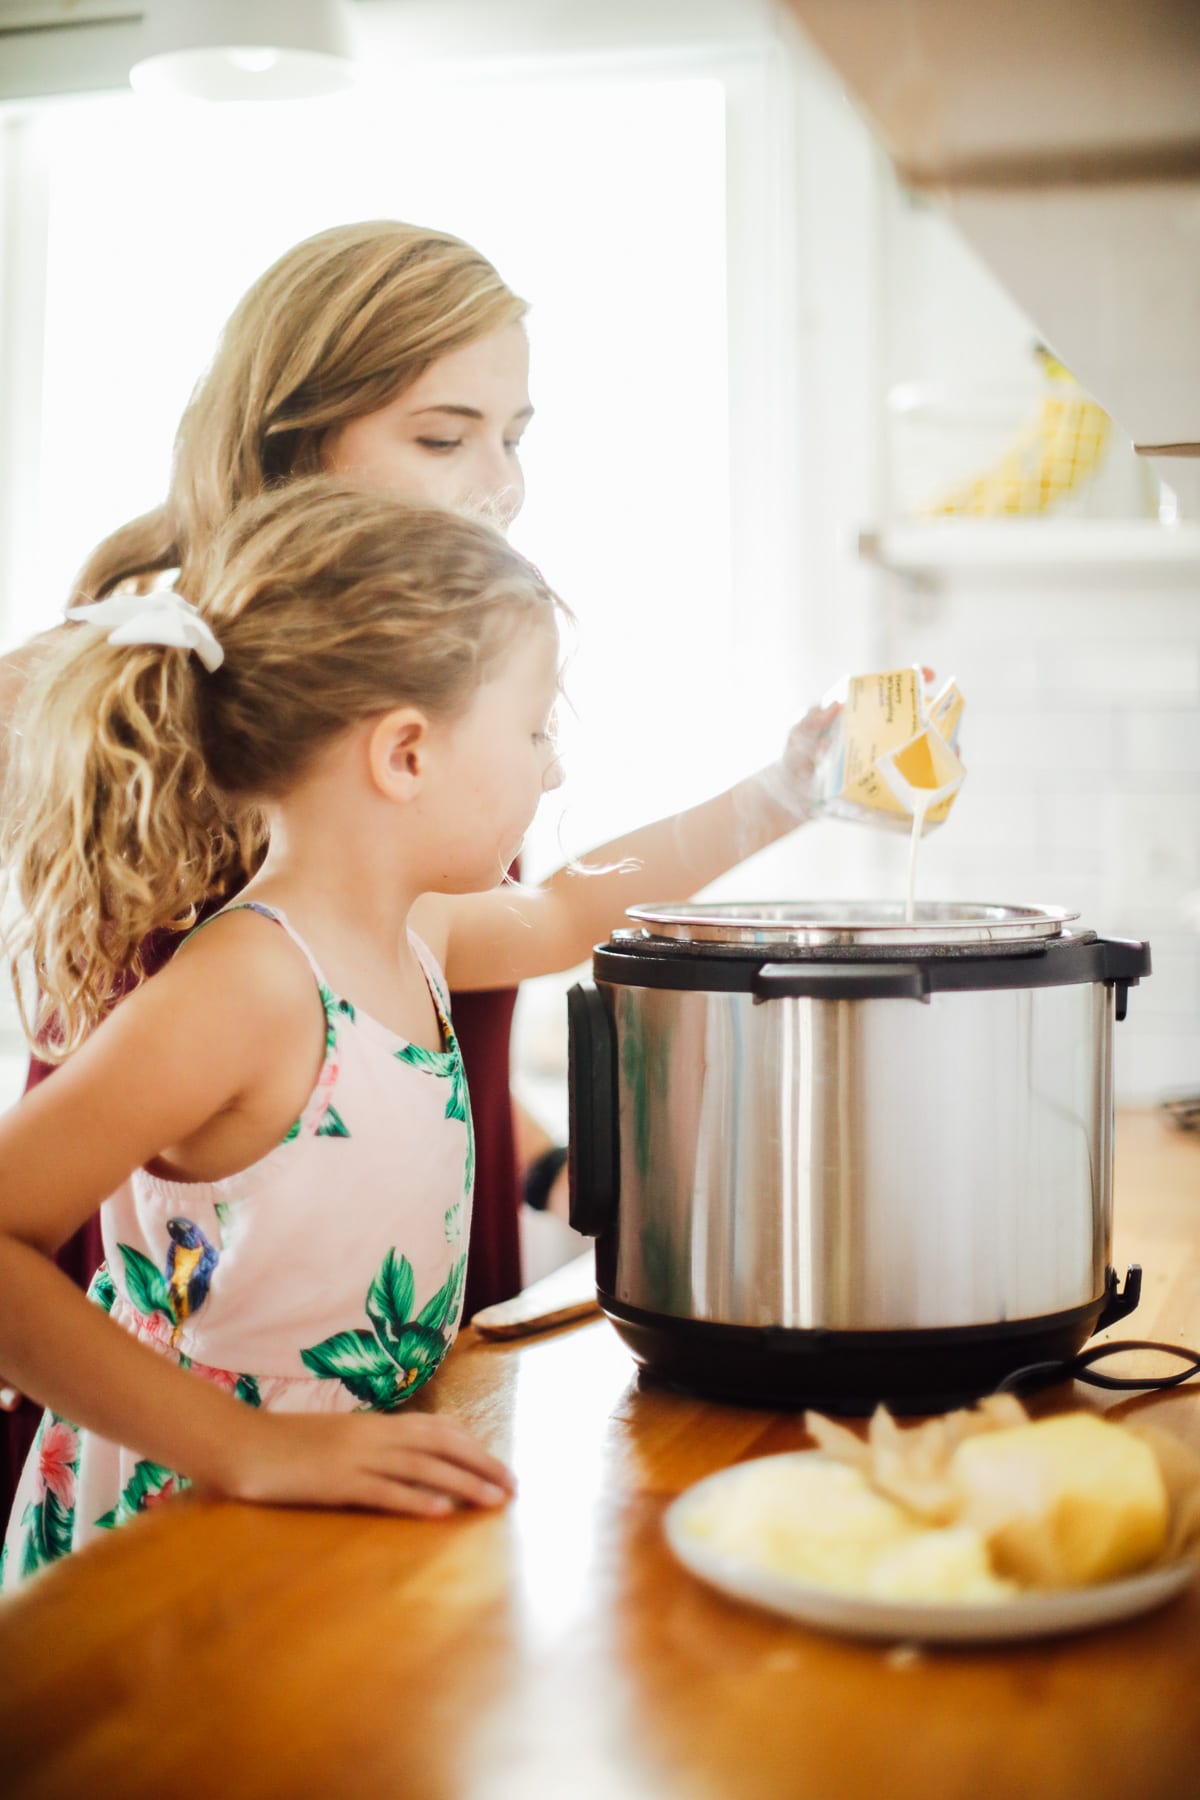 How to Use an Instant Pot (Electric Pressure Cooker)